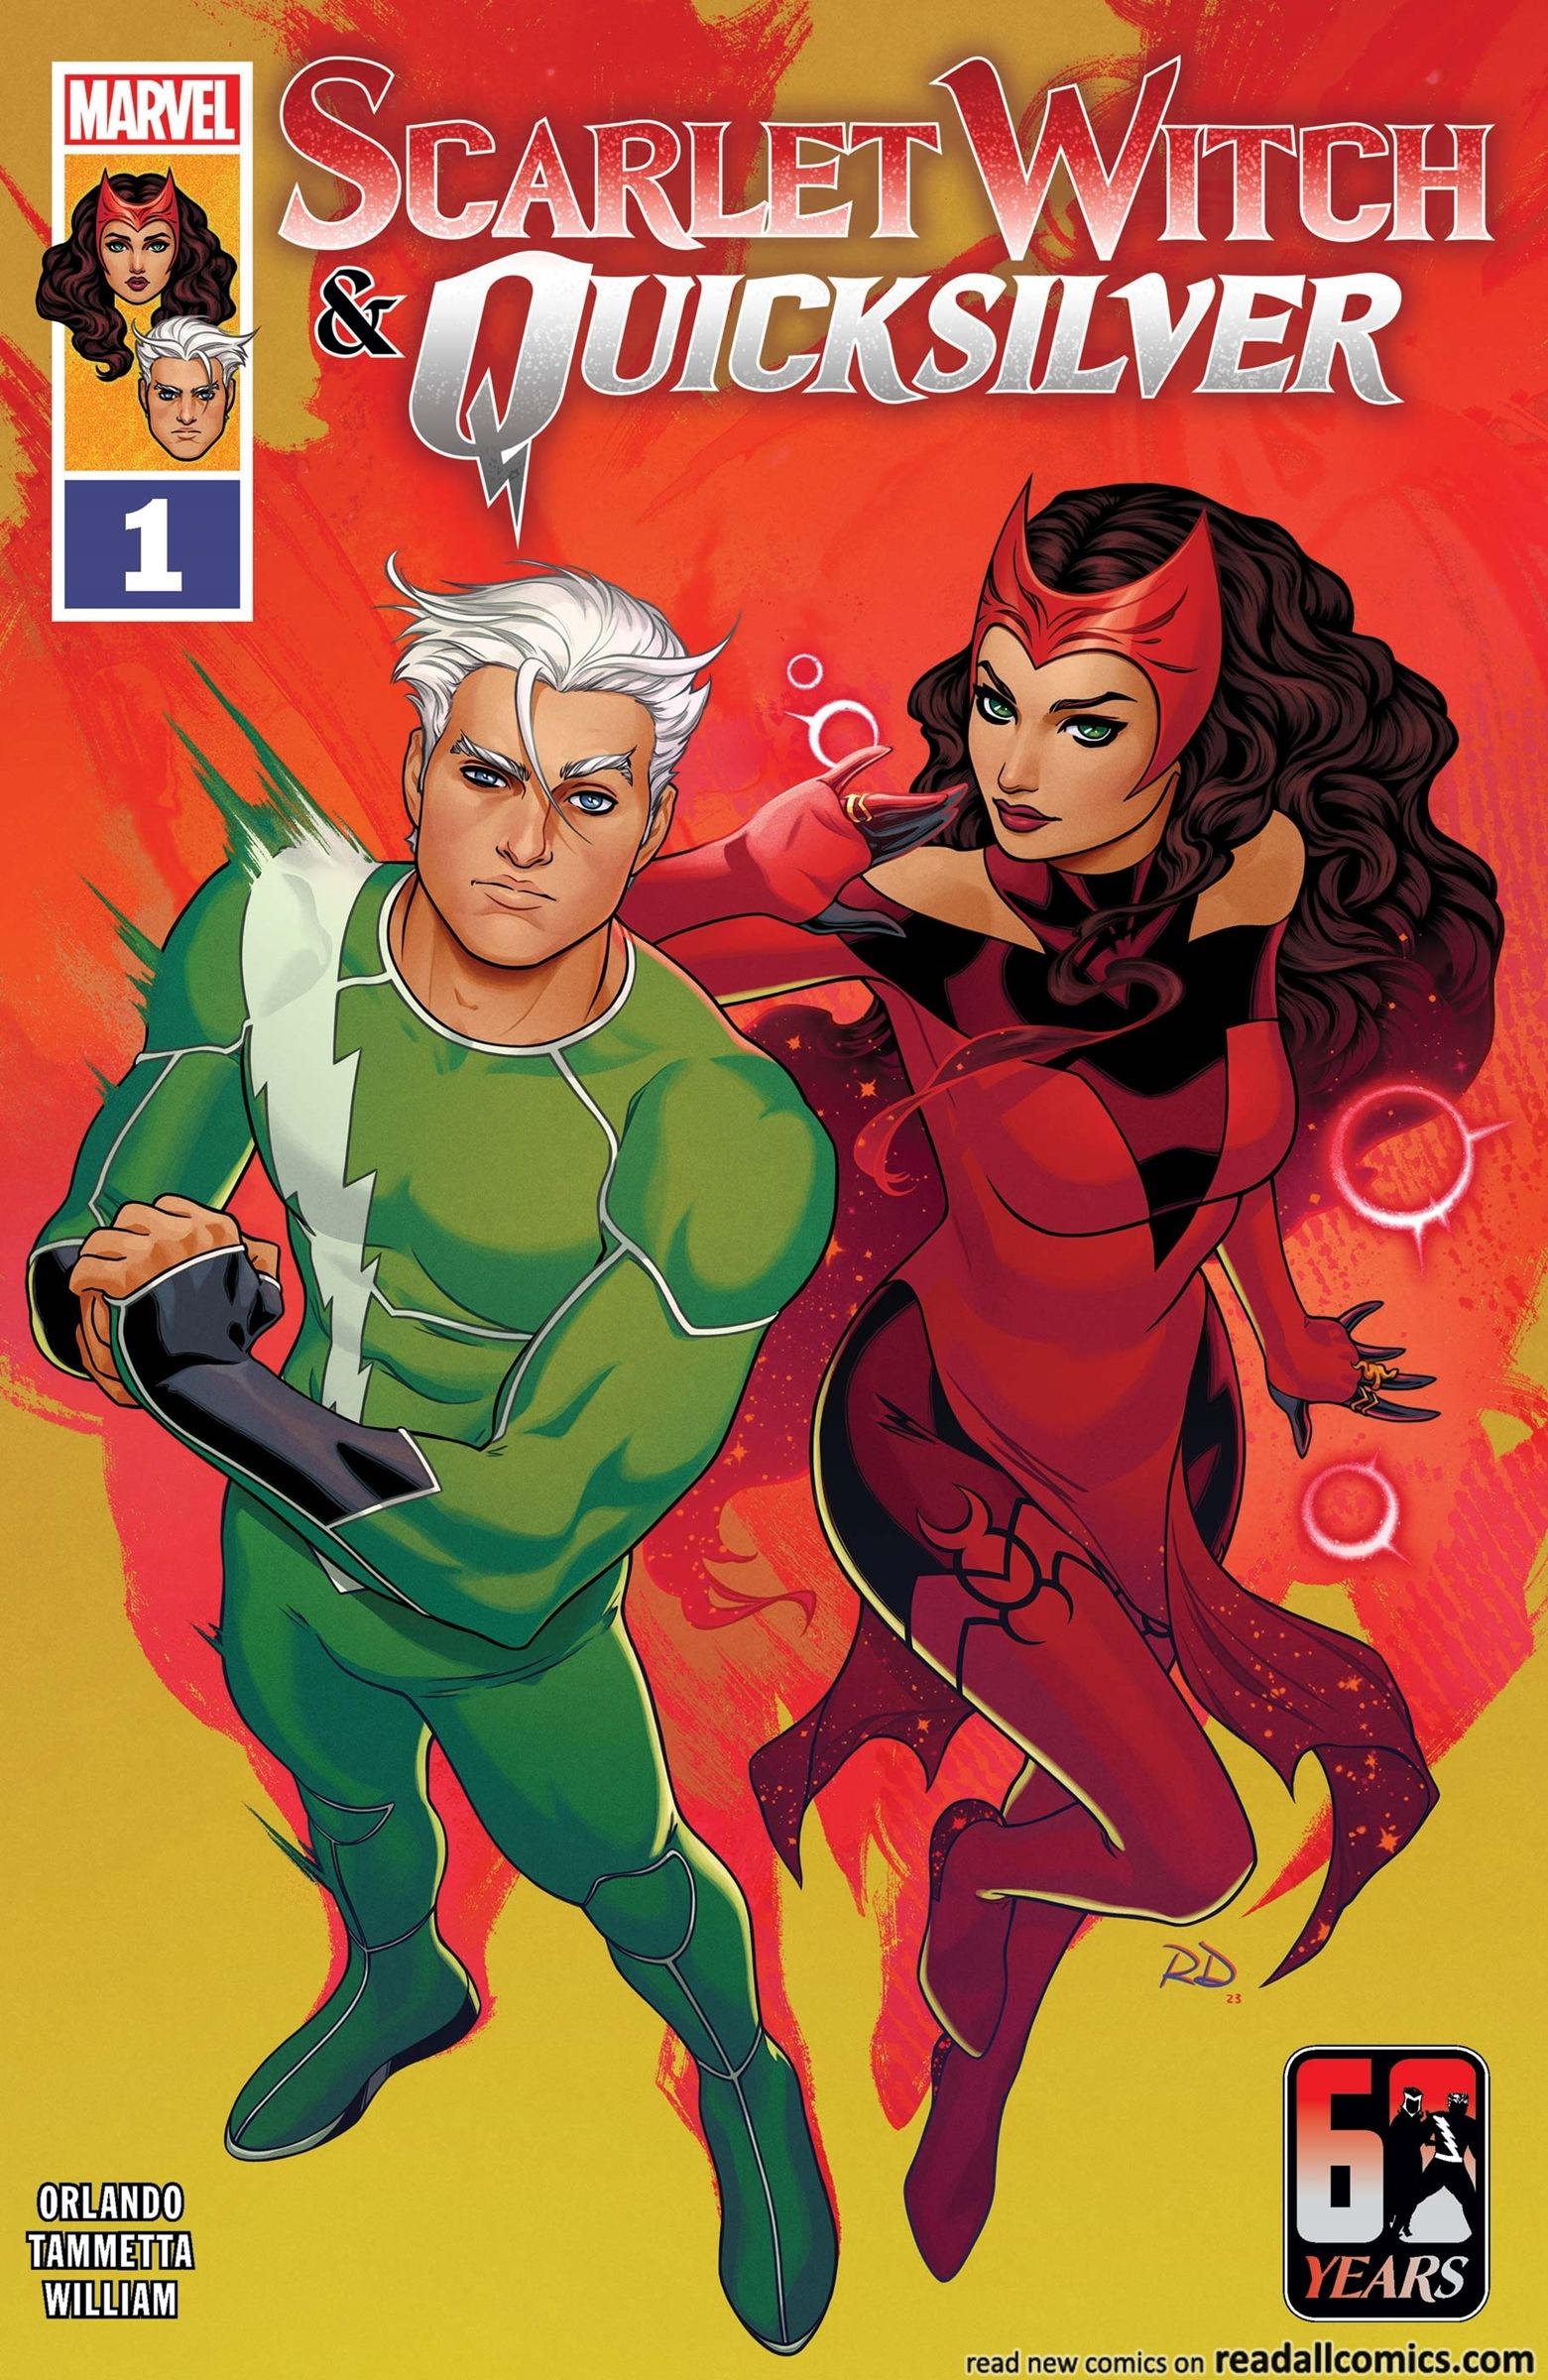 Scarlet Witch in costume and tiara stands beside Quicksilver in his new green suit design